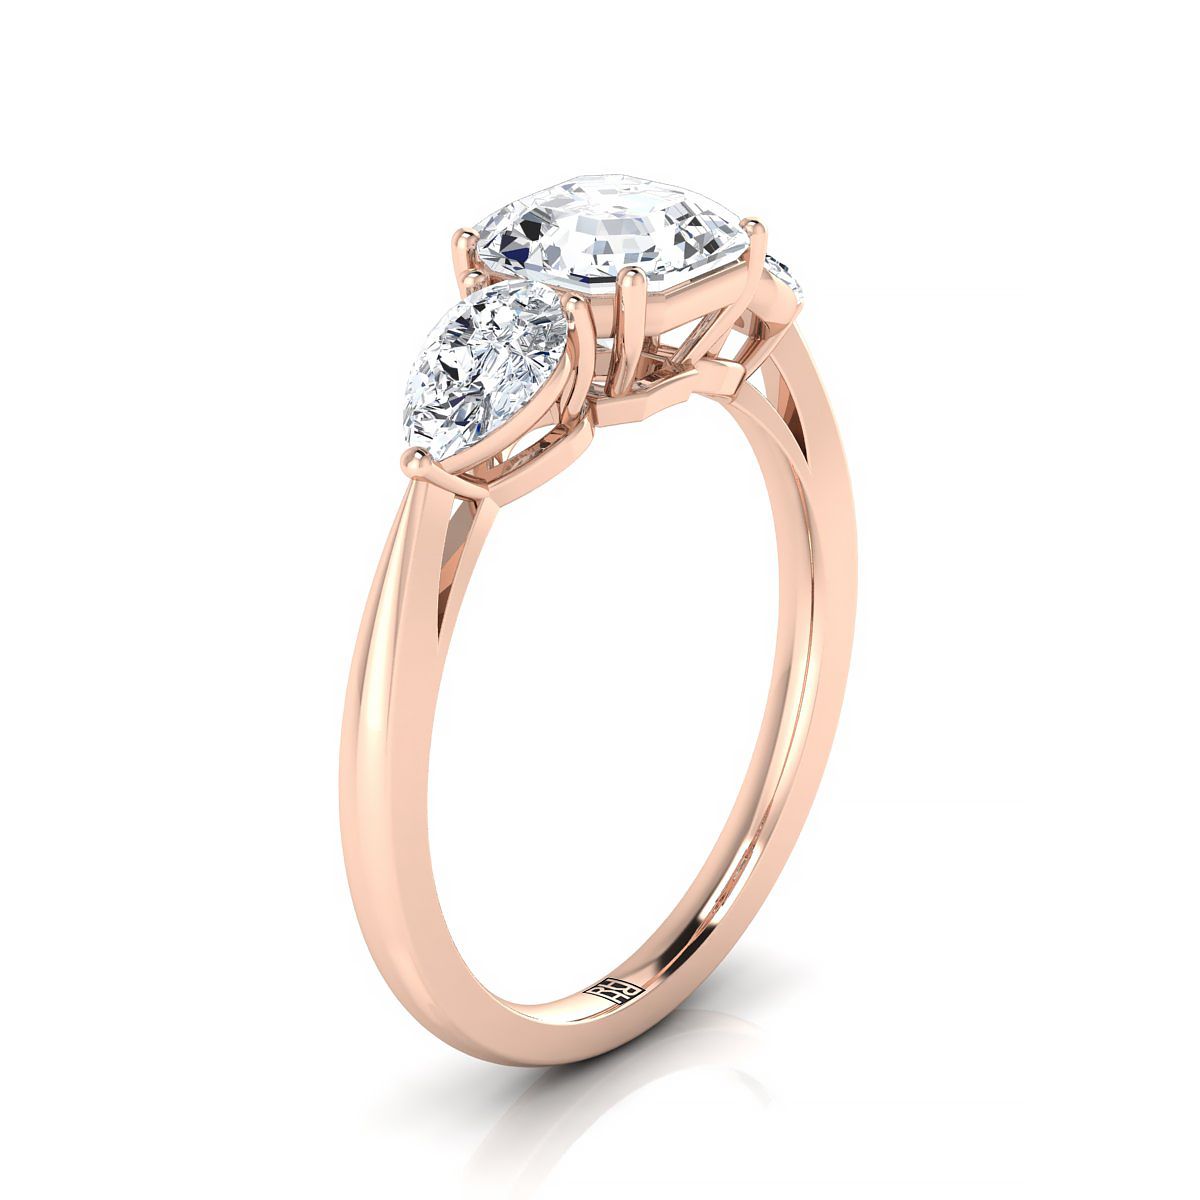 14K Rose Gold Asscher Cut Diamond Perfectly Matched Pear Shaped Three Diamond Engagement Ring -7/8ctw